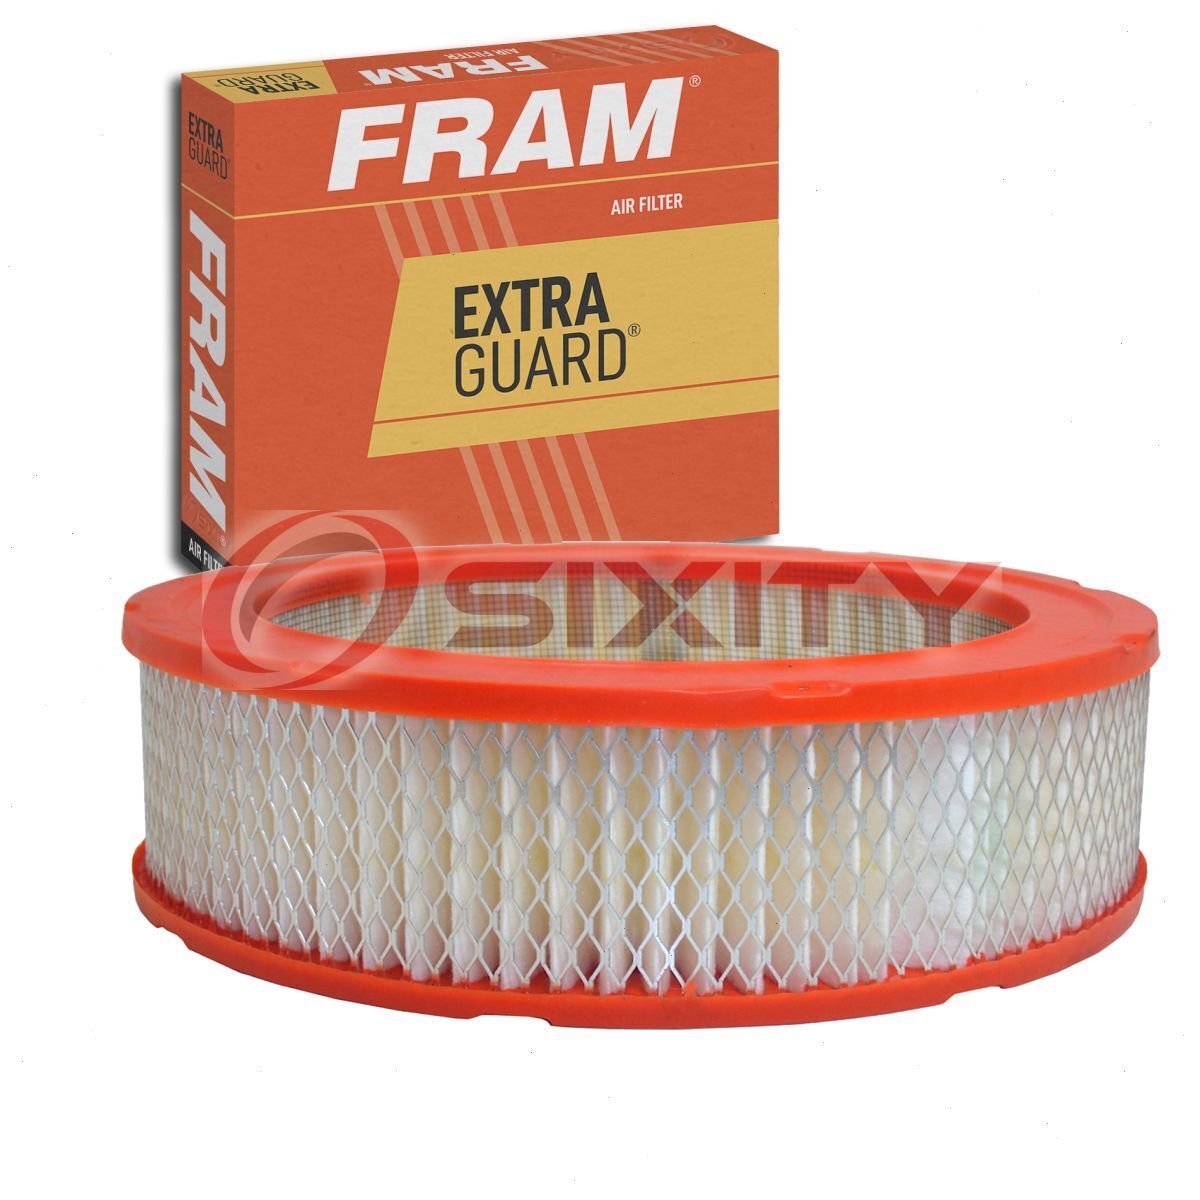 FRAM Extra Guard Air Filter for 1968-1978 Dodge Monaco Intake Inlet Manifold it